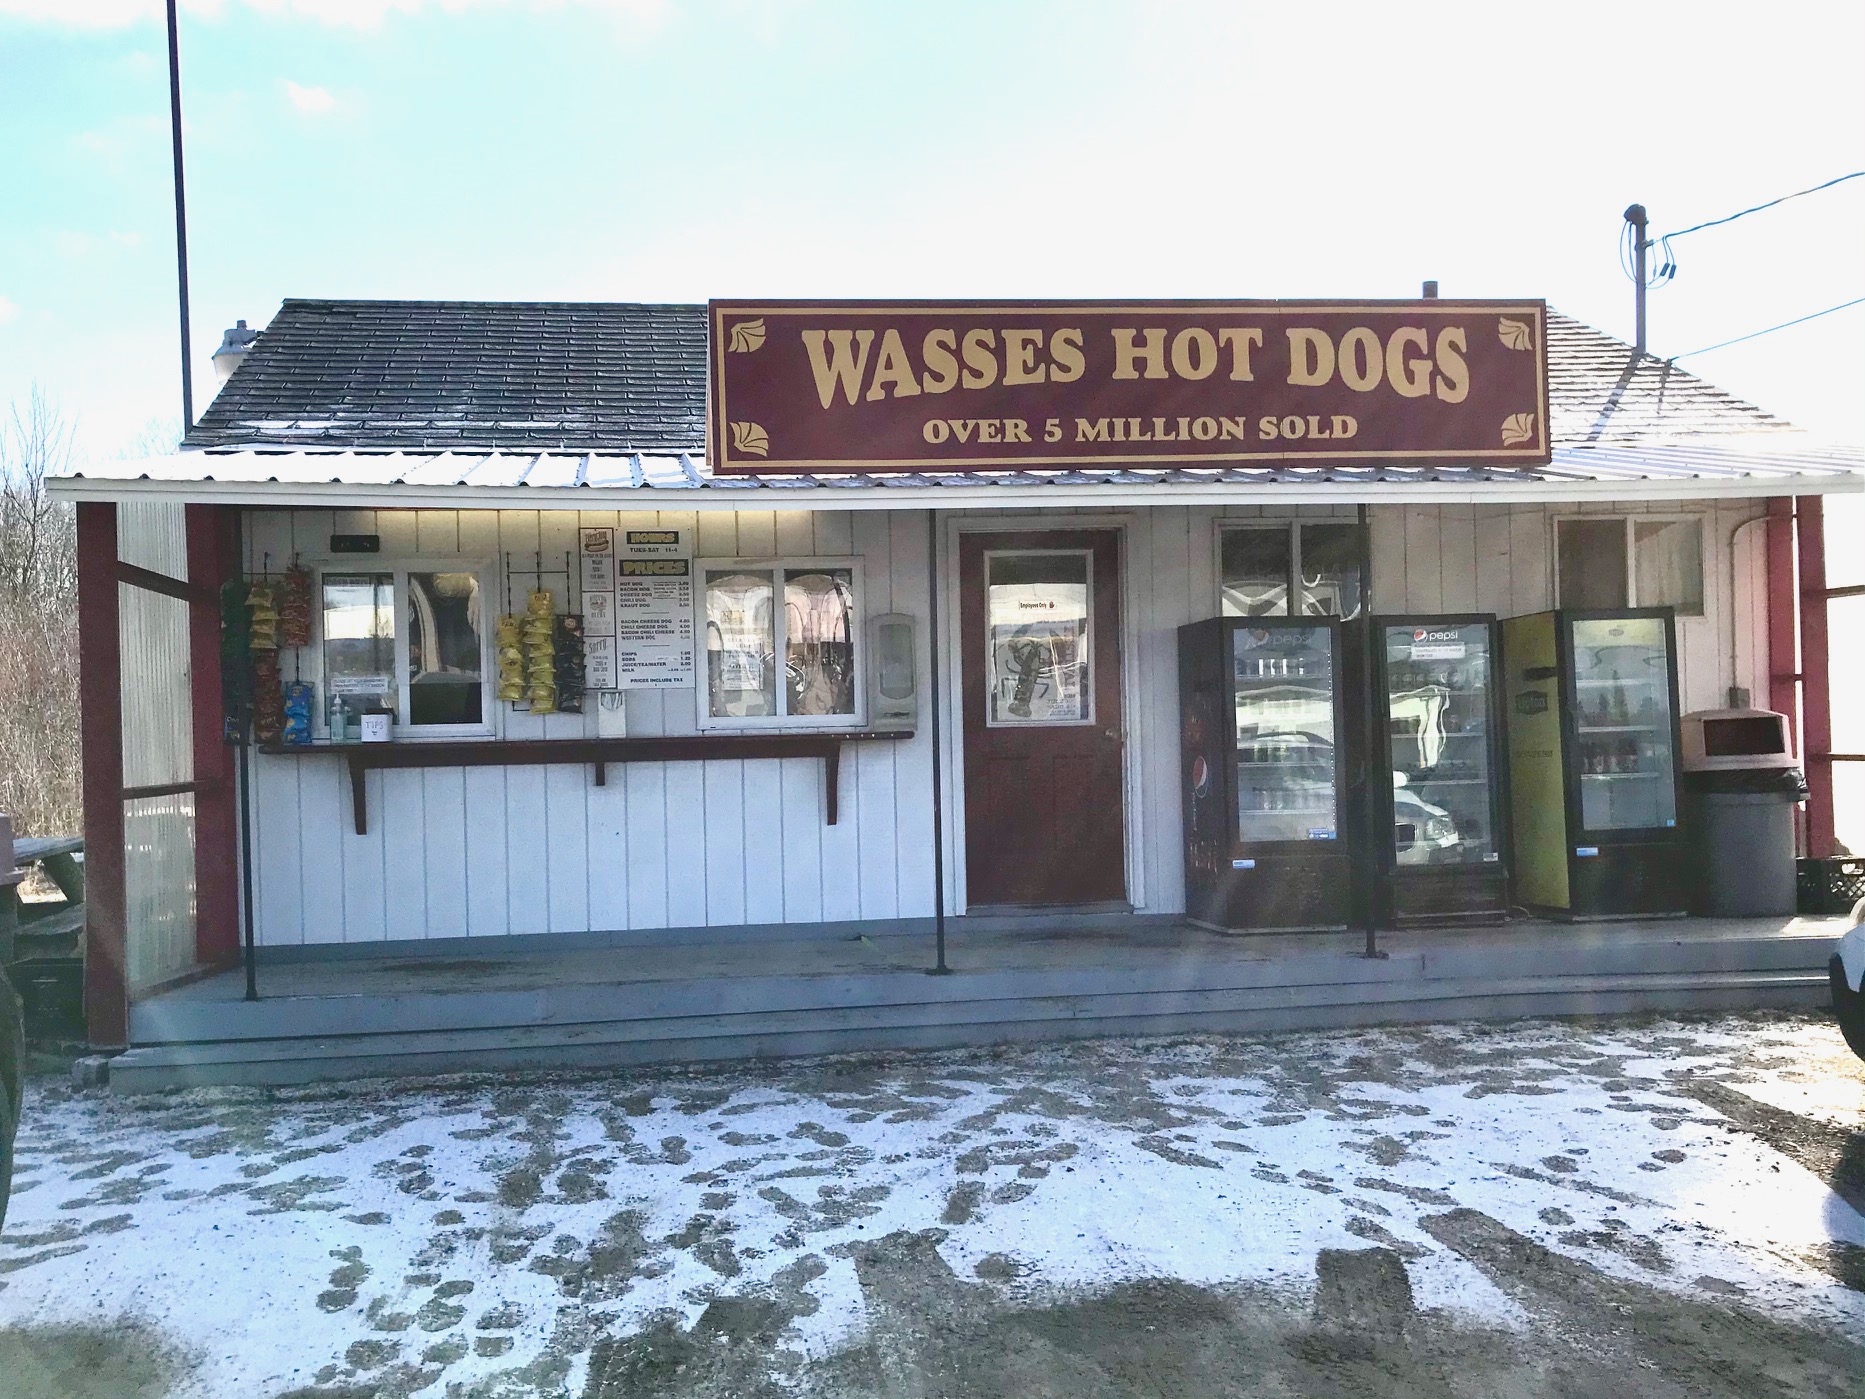 Wasses Hot Dogs in Rockland, Maine